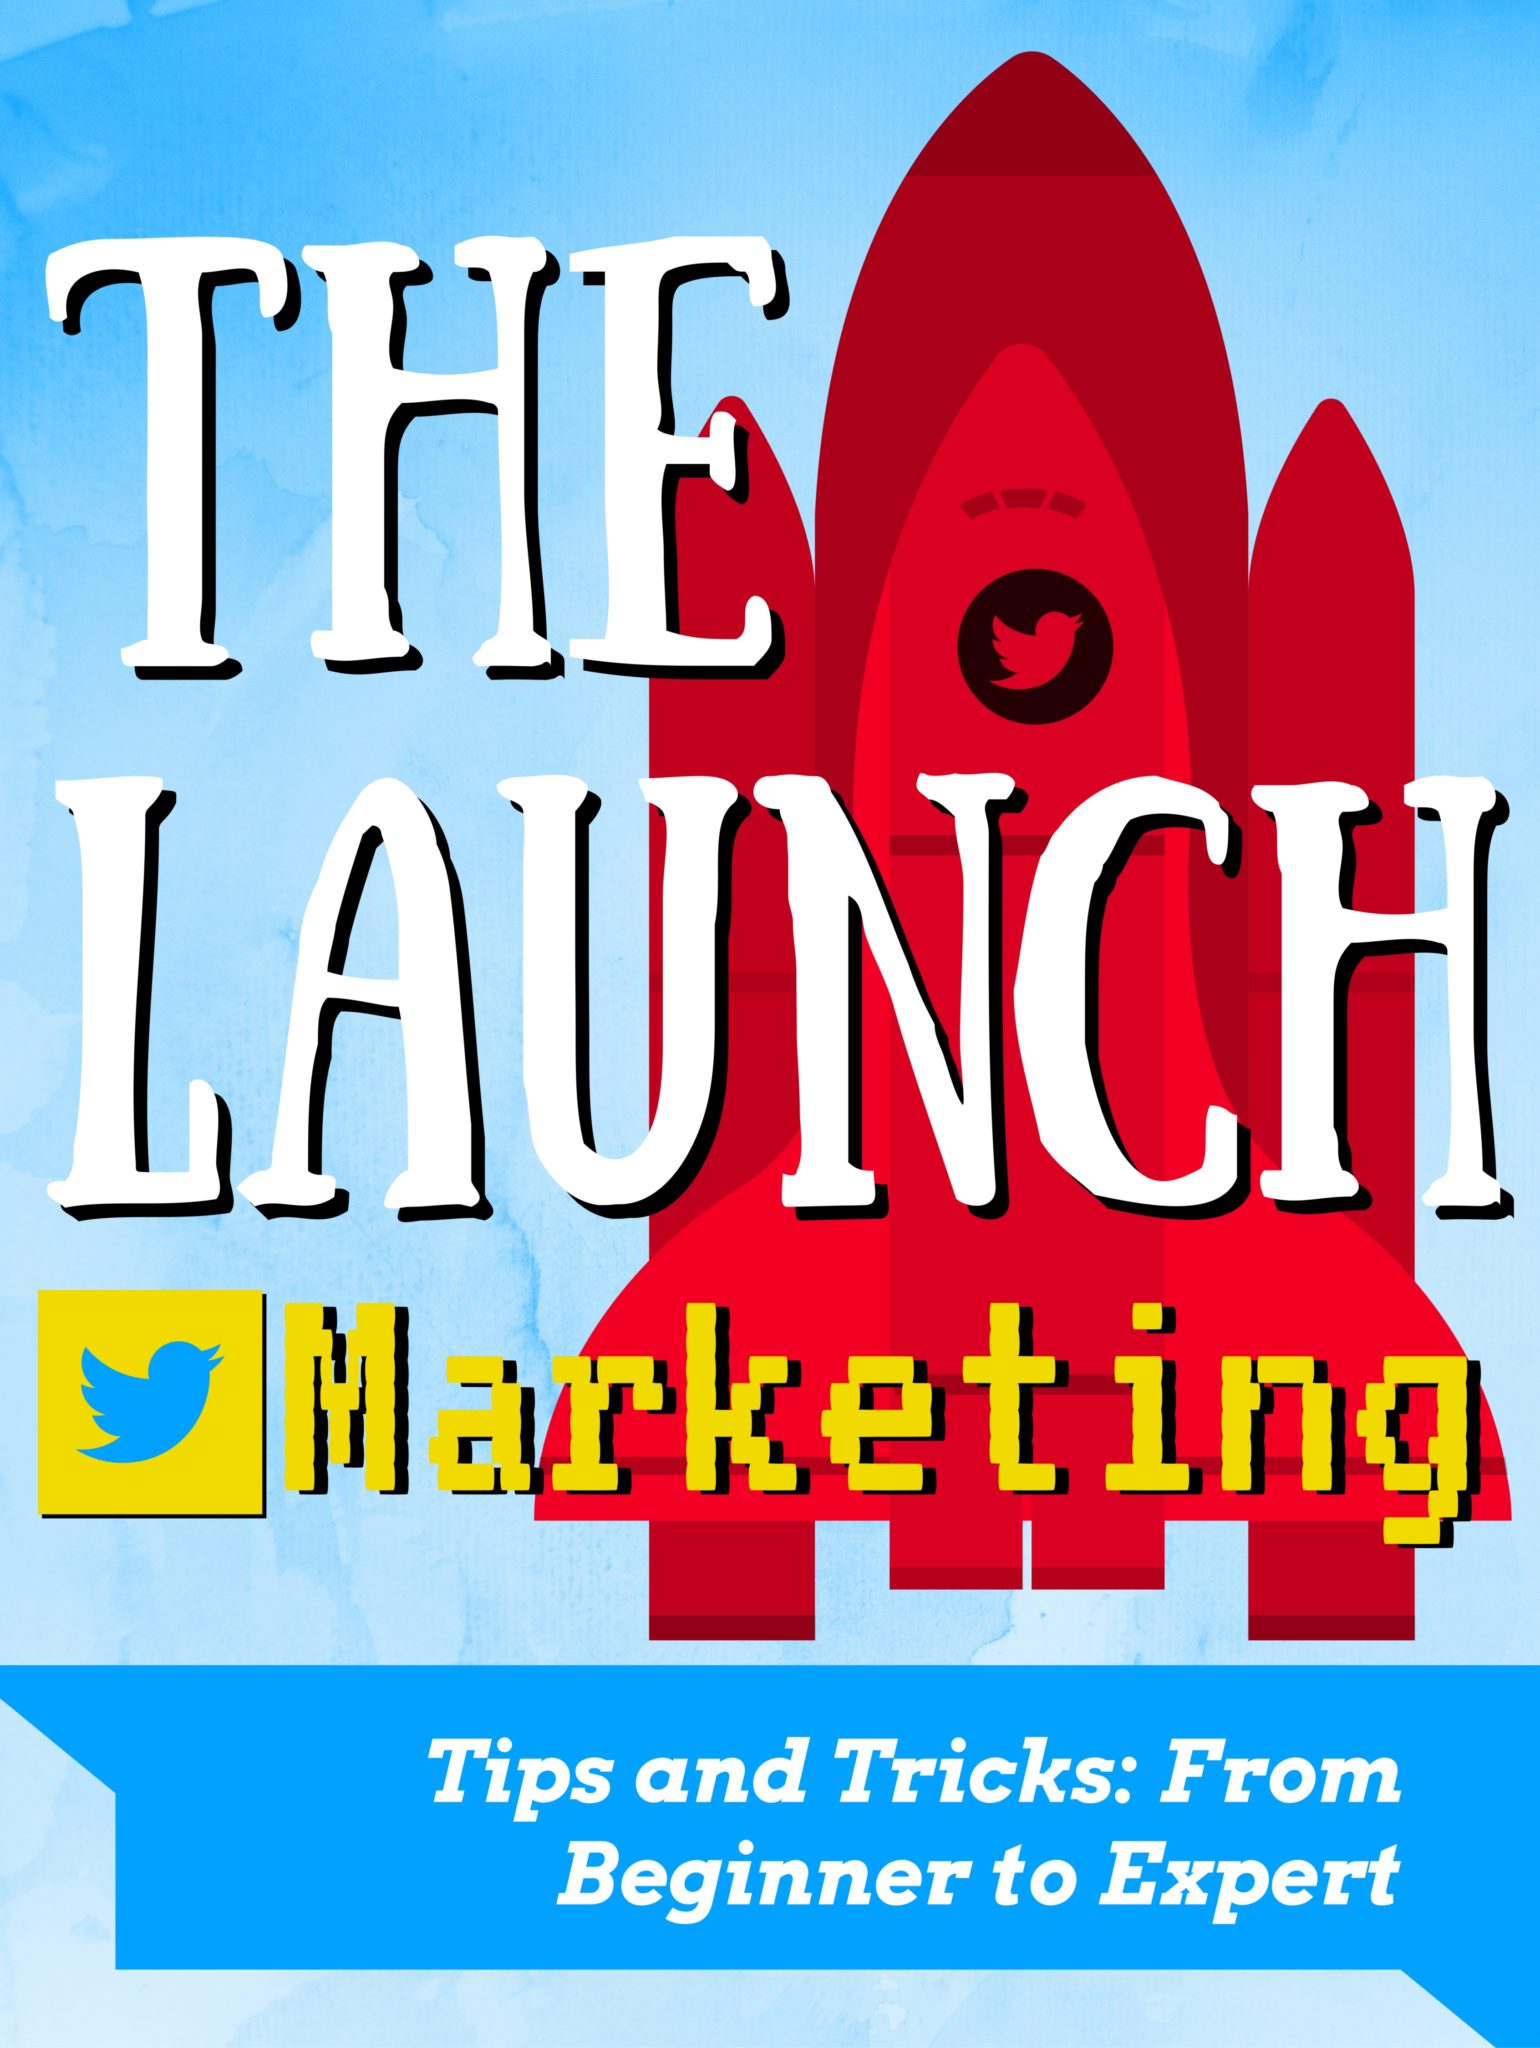 FREE: Twitter for dummies: The Launch, Twitter Marketing Tips and Tricks: From Beginner to Expert by Froilan Dugeno